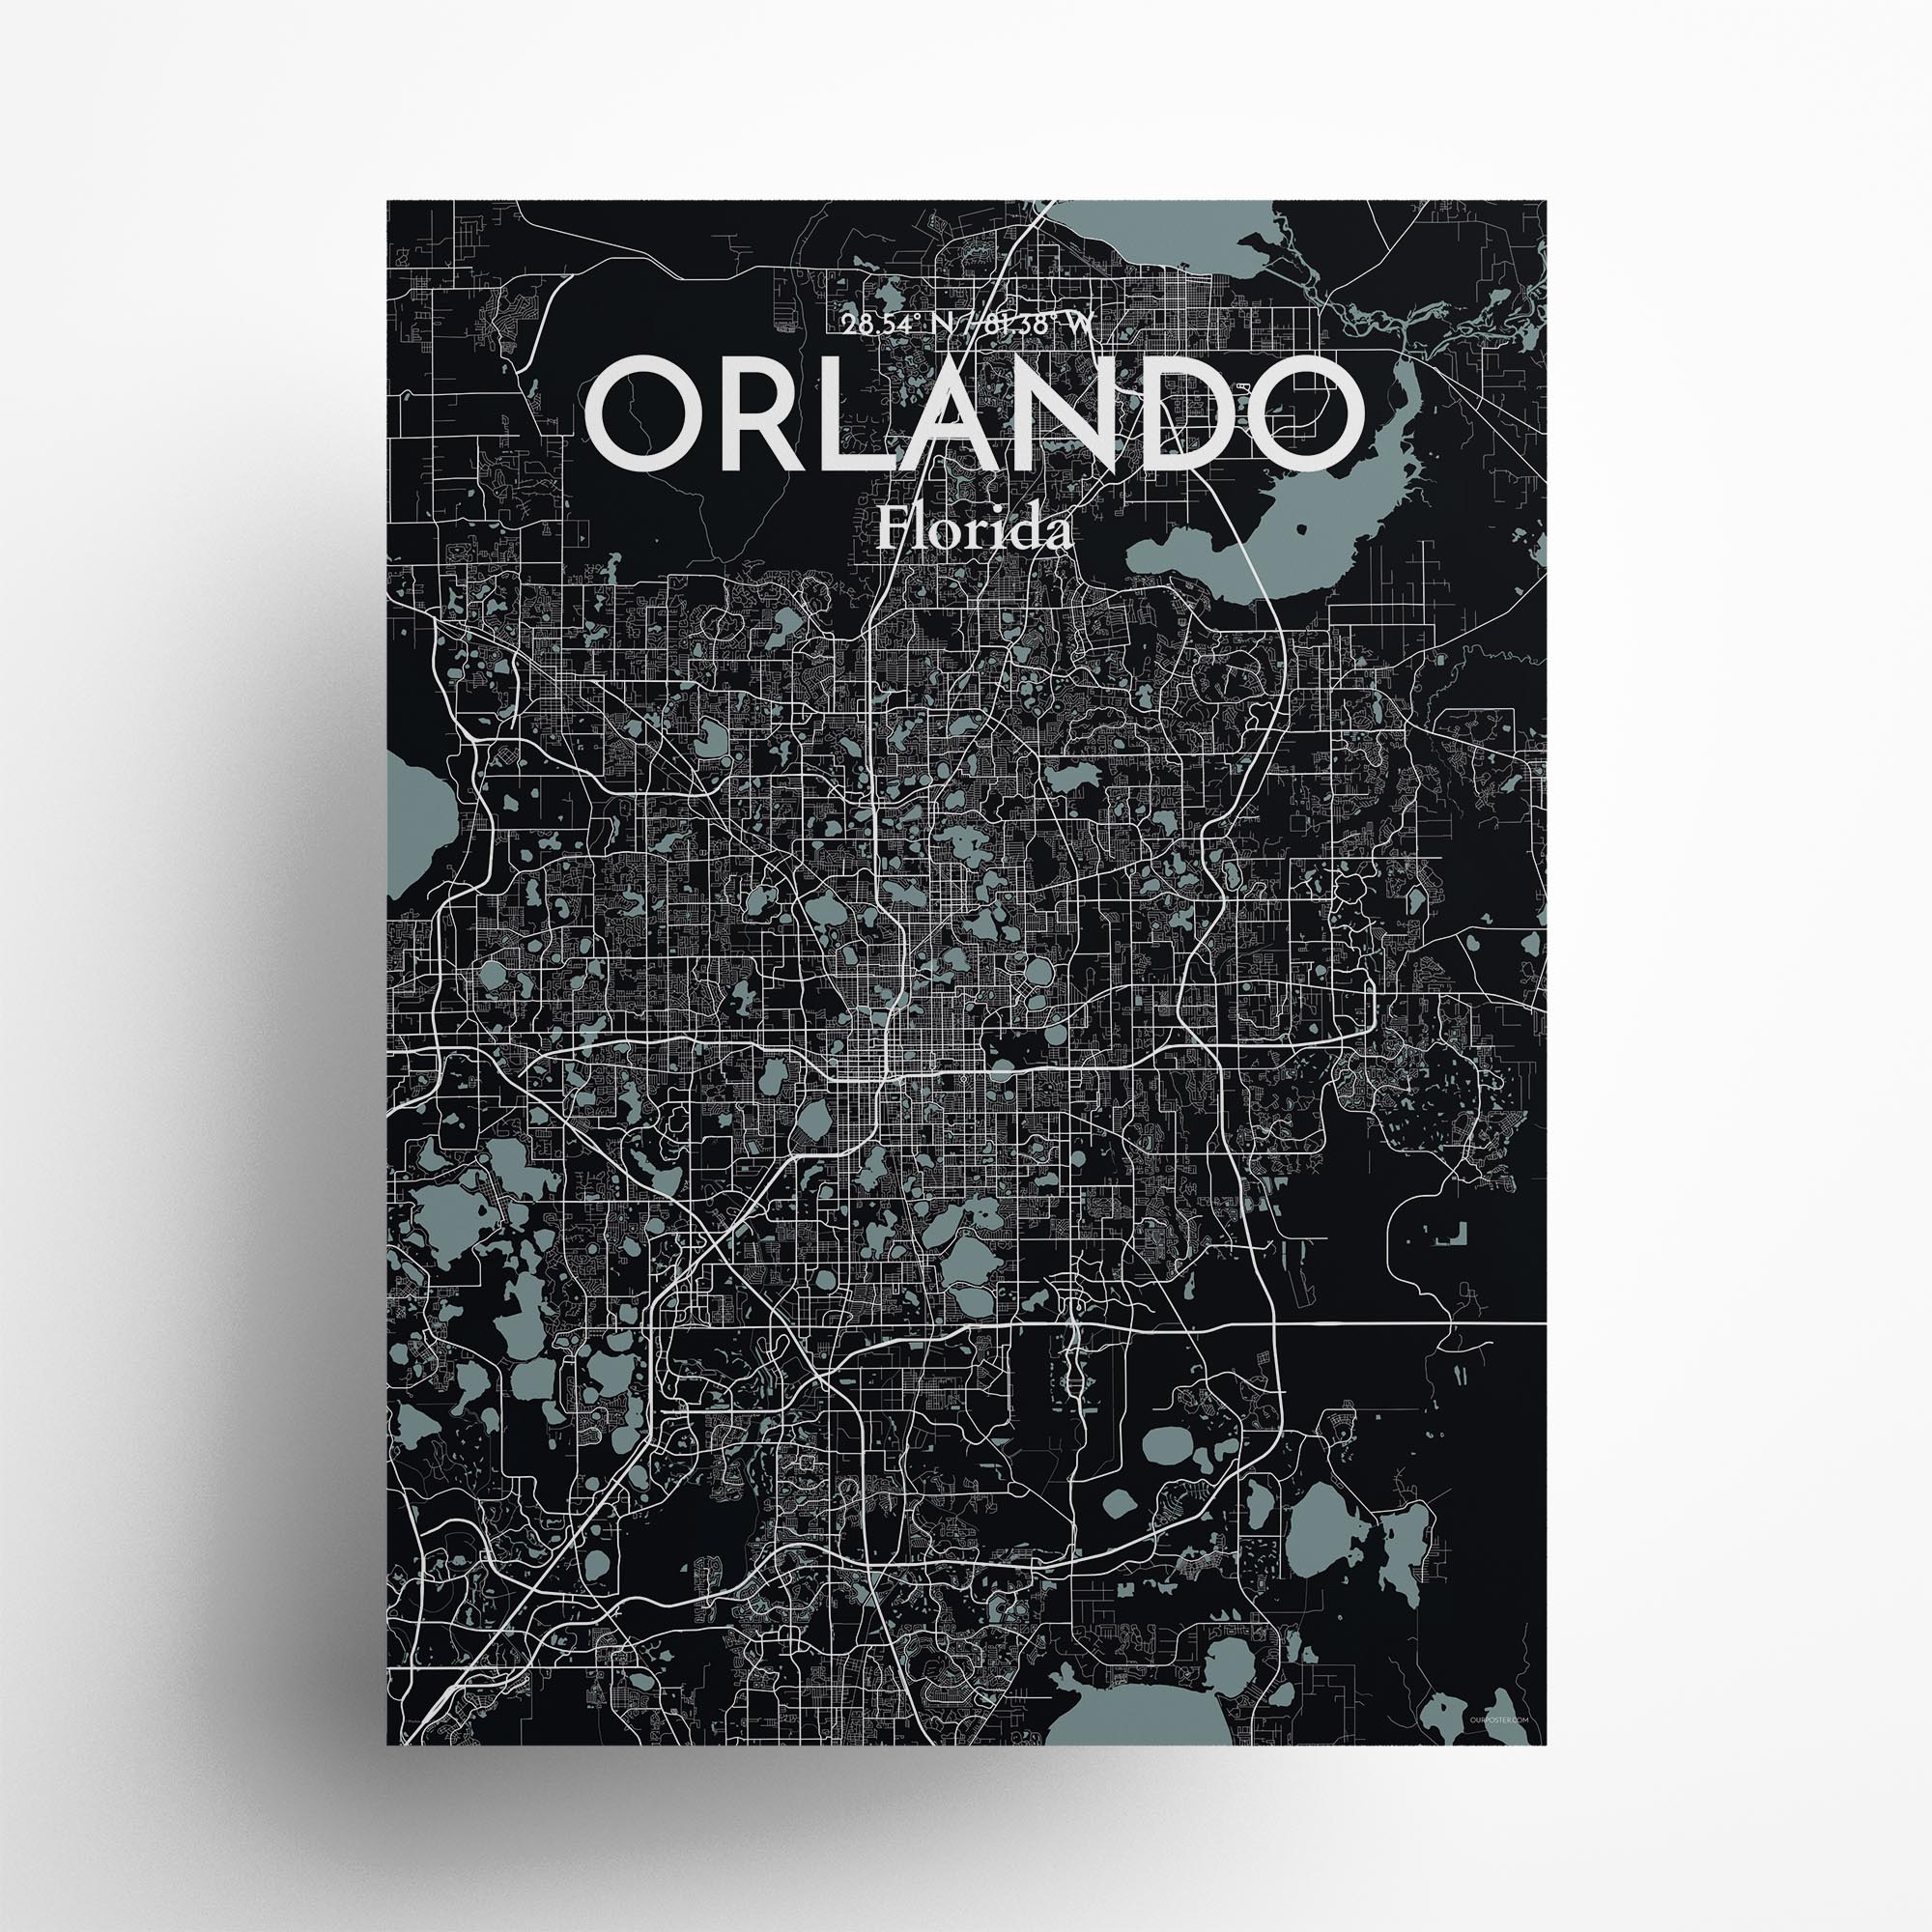 Orlando city map poster in Midnight of size 18" x 24"